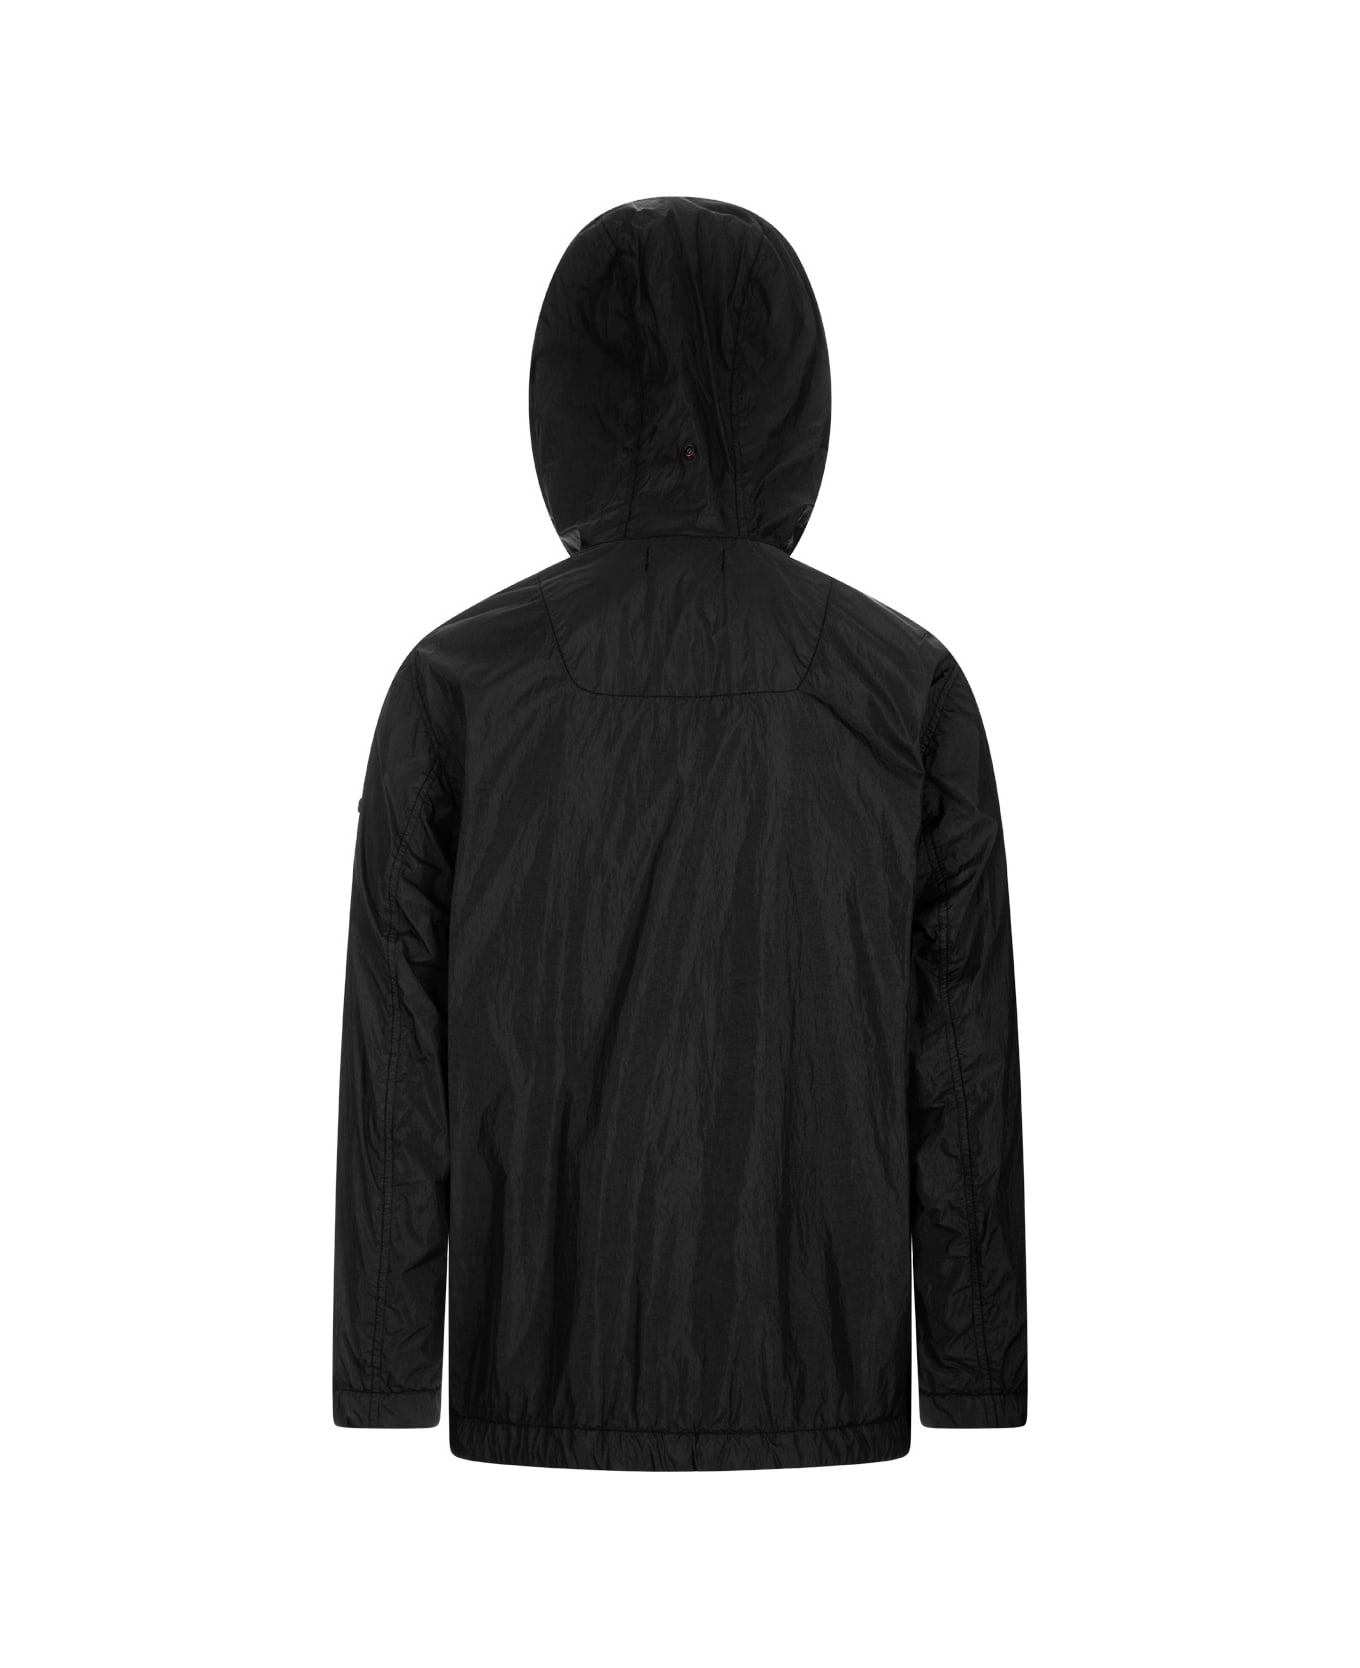 Stone Island Garment Dyed Crinkle Reps R-ny Lightweight Jacket In Black - Black